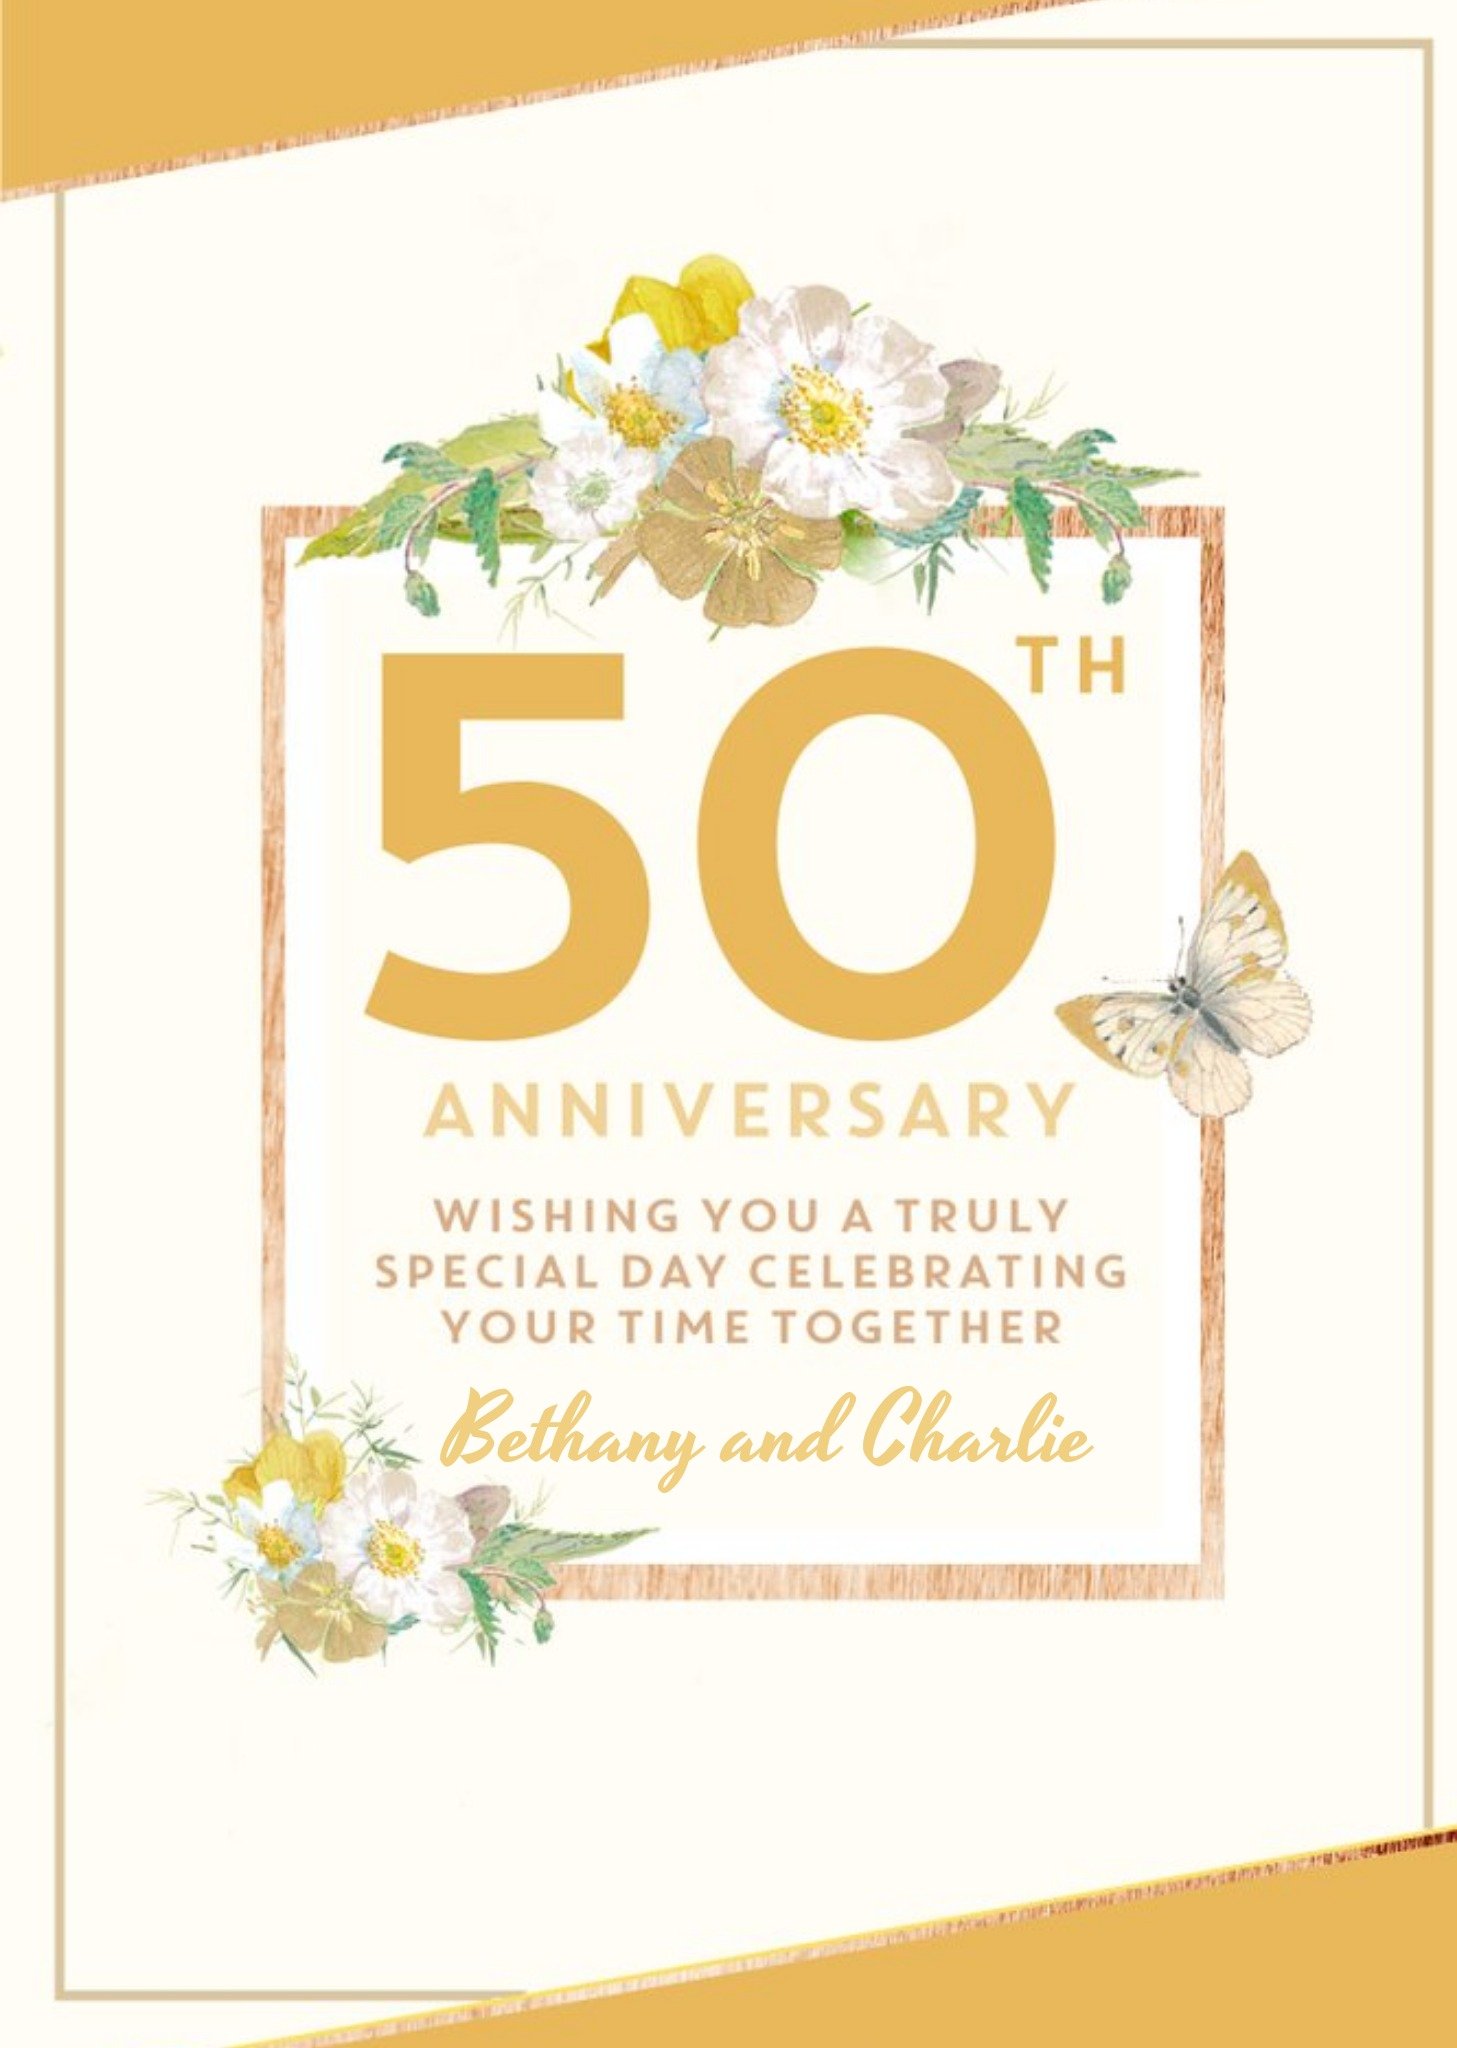 Edwardian Lady Traditional 50th Anniversary Card, Wishing You A Truly Special Day, Large